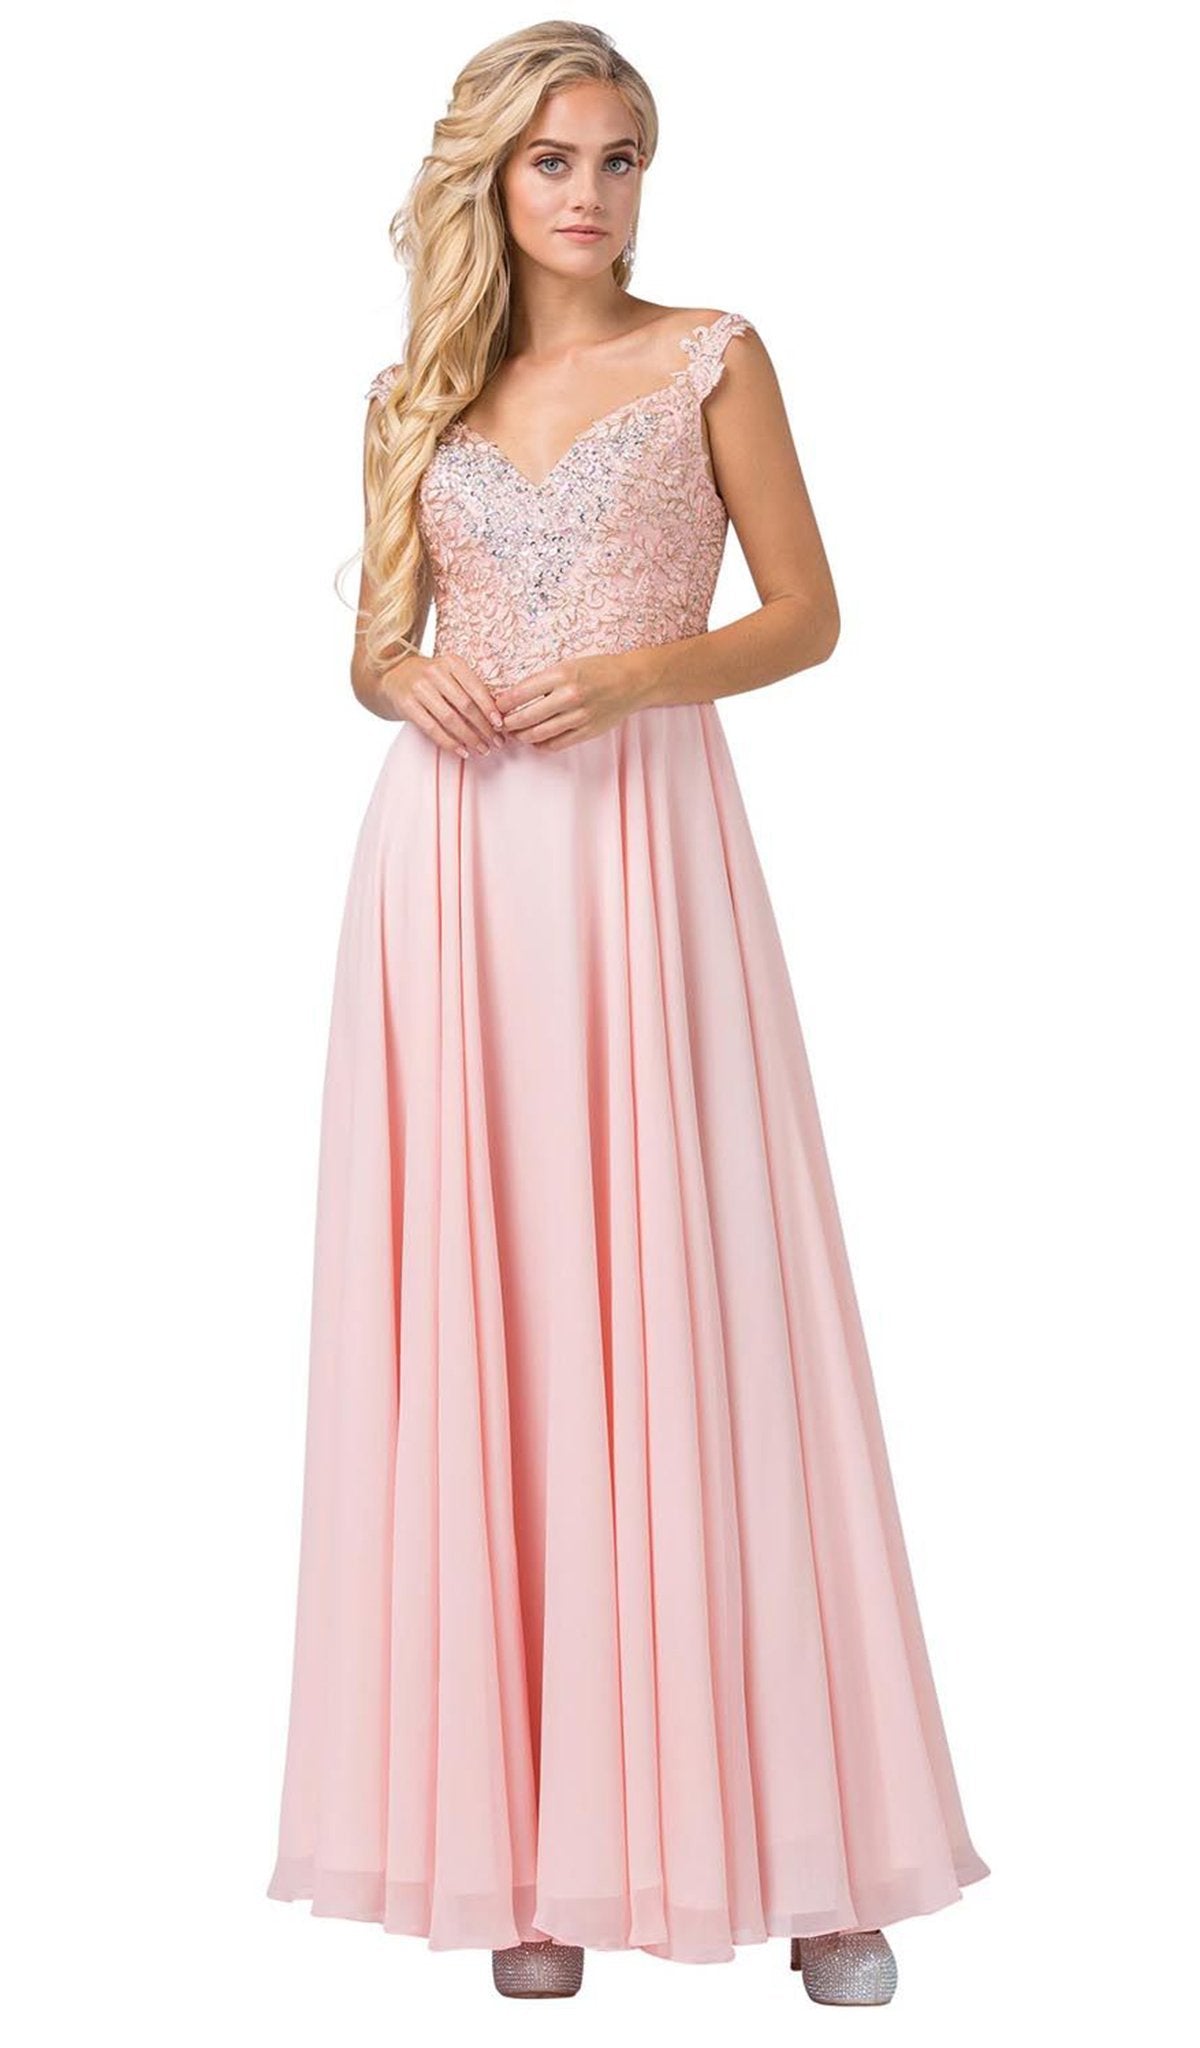 Dancing Queen - 2818 Beaded Lace Bodice Lace-Up Back Chiffon Gown In Pink